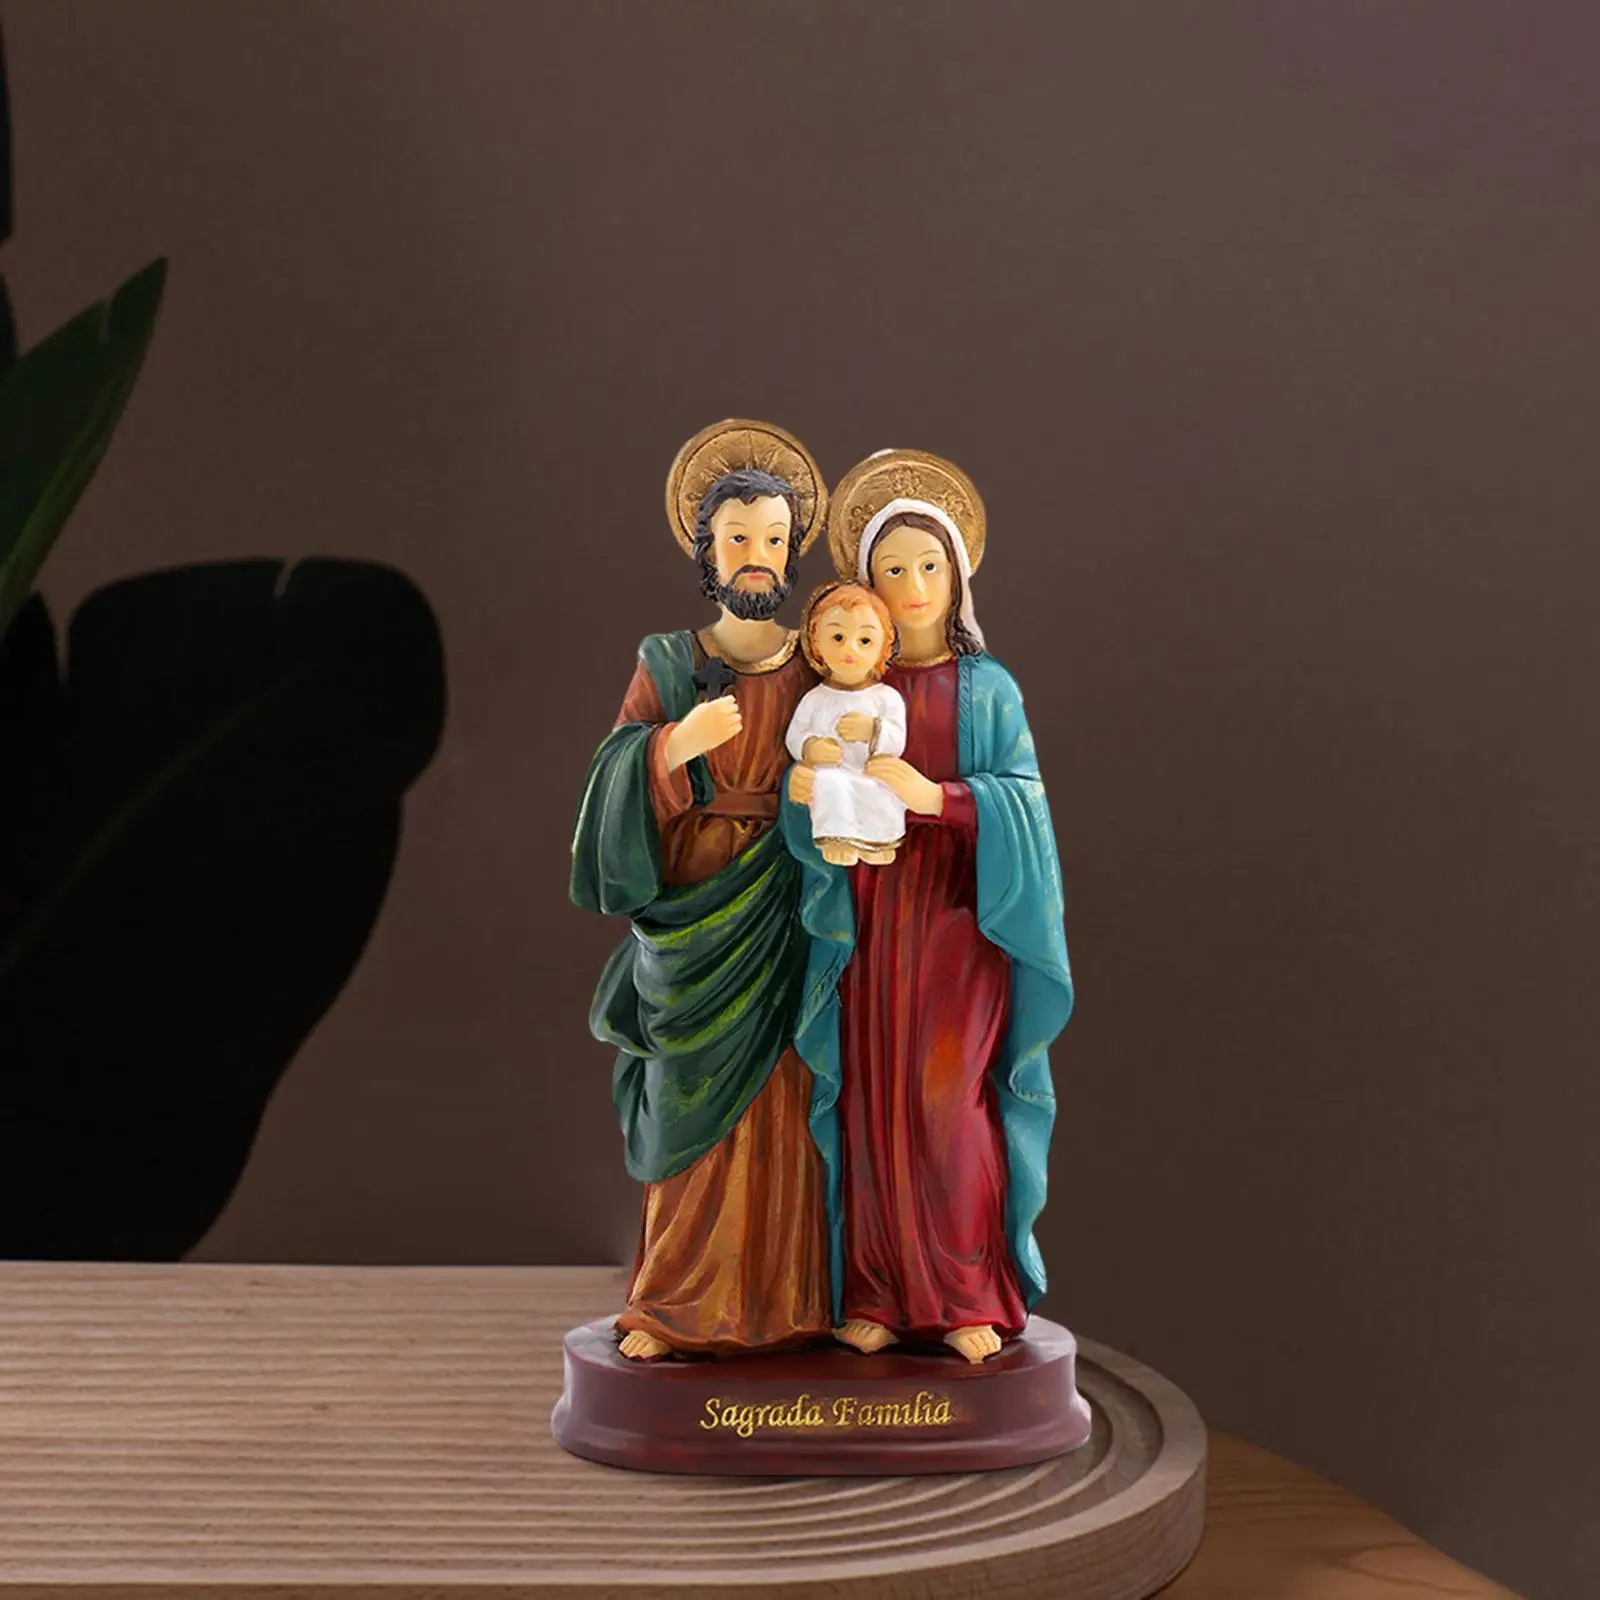 Holy Family Statue Jesus Figurine Religious Sculpture for Office Home Shelf